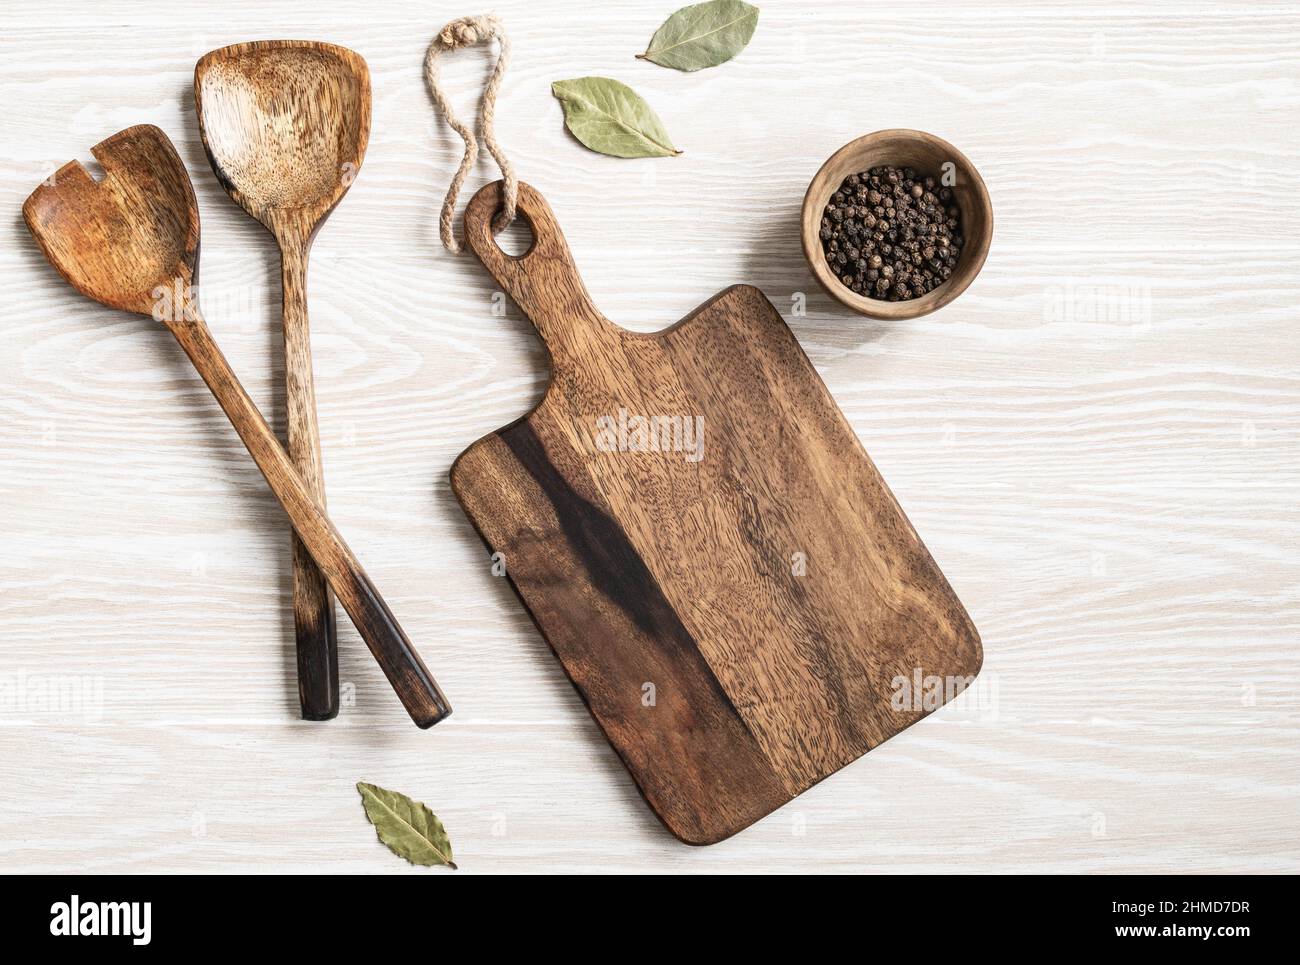 Minimal wood white kitchen background with brown cutting board, various spices, appliances and cotton napkin. Kitchen utensils on texture white table. Stock Photo